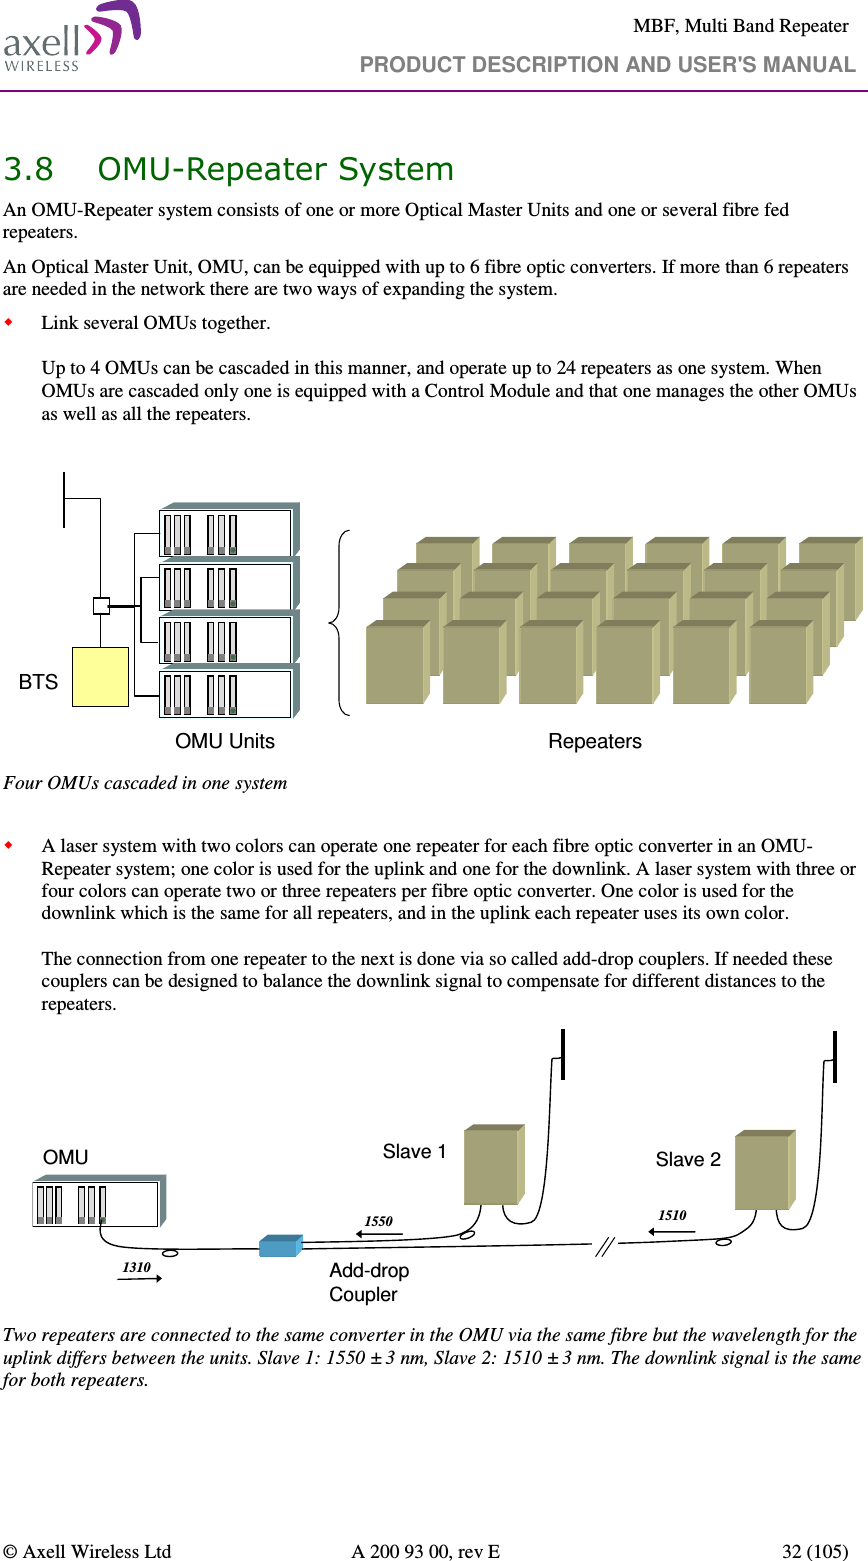     MBF, Multi Band Repeater                                     PRODUCT DESCRIPTION AND USER&apos;S MANUAL   © Axell Wireless Ltd  A 200 93 00, rev E  32 (105)  3.8 OMU-Repeater System An OMU-Repeater system consists of one or more Optical Master Units and one or several fibre fed repeaters.  An Optical Master Unit, OMU, can be equipped with up to 6 fibre optic converters. If more than 6 repeaters are needed in the network there are two ways of expanding the system.  Link several OMUs together.   Up to 4 OMUs can be cascaded in this manner, and operate up to 24 repeaters as one system. When OMUs are cascaded only one is equipped with a Control Module and that one manages the other OMUs as well as all the repeaters.    BTSRepeatersOMU Units Four OMUs cascaded in one system   A laser system with two colors can operate one repeater for each fibre optic converter in an OMU-Repeater system; one color is used for the uplink and one for the downlink. A laser system with three or four colors can operate two or three repeaters per fibre optic converter. One color is used for the downlink which is the same for all repeaters, and in the uplink each repeater uses its own color.   The connection from one repeater to the next is done via so called add-drop couplers. If needed these couplers can be designed to balance the downlink signal to compensate for different distances to the repeaters.        Add-drop CouplerSlave 1 Slave 2OMU13101550 1510 Two repeaters are connected to the same converter in the OMU via the same fibre but the wavelength for the uplink differs between the units. Slave 1: 1550 ± 3 nm, Slave 2: 1510 ± 3 nm. The downlink signal is the same for both repeaters.  